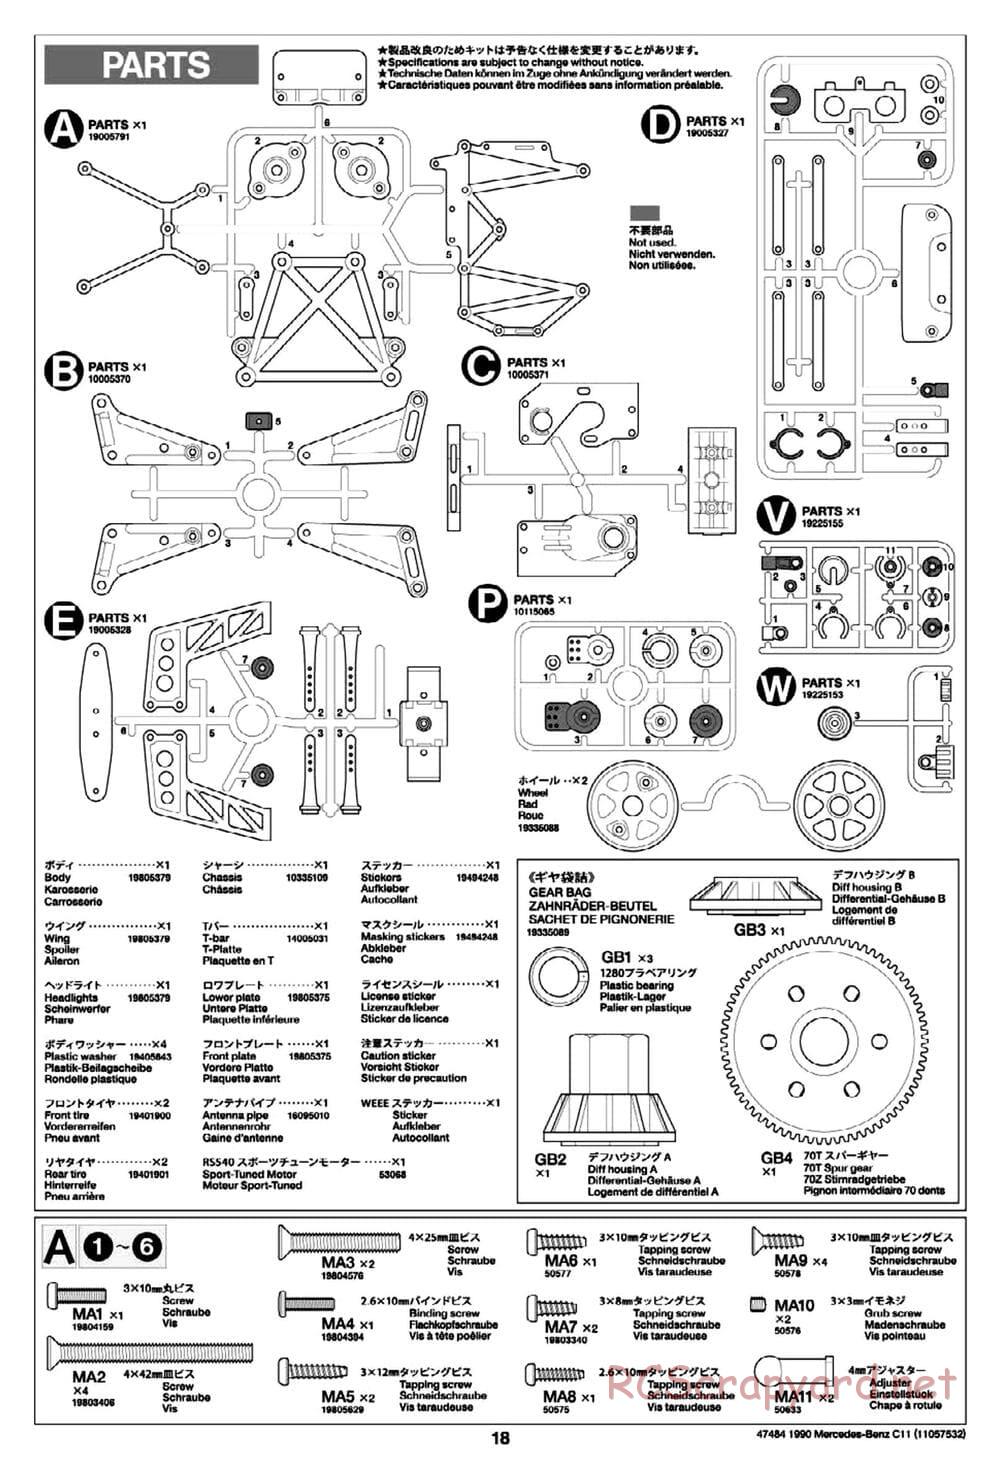 Tamiya - 1990 Mercedes-Benz C11 - Group-C Chassis - Manual - Page 18